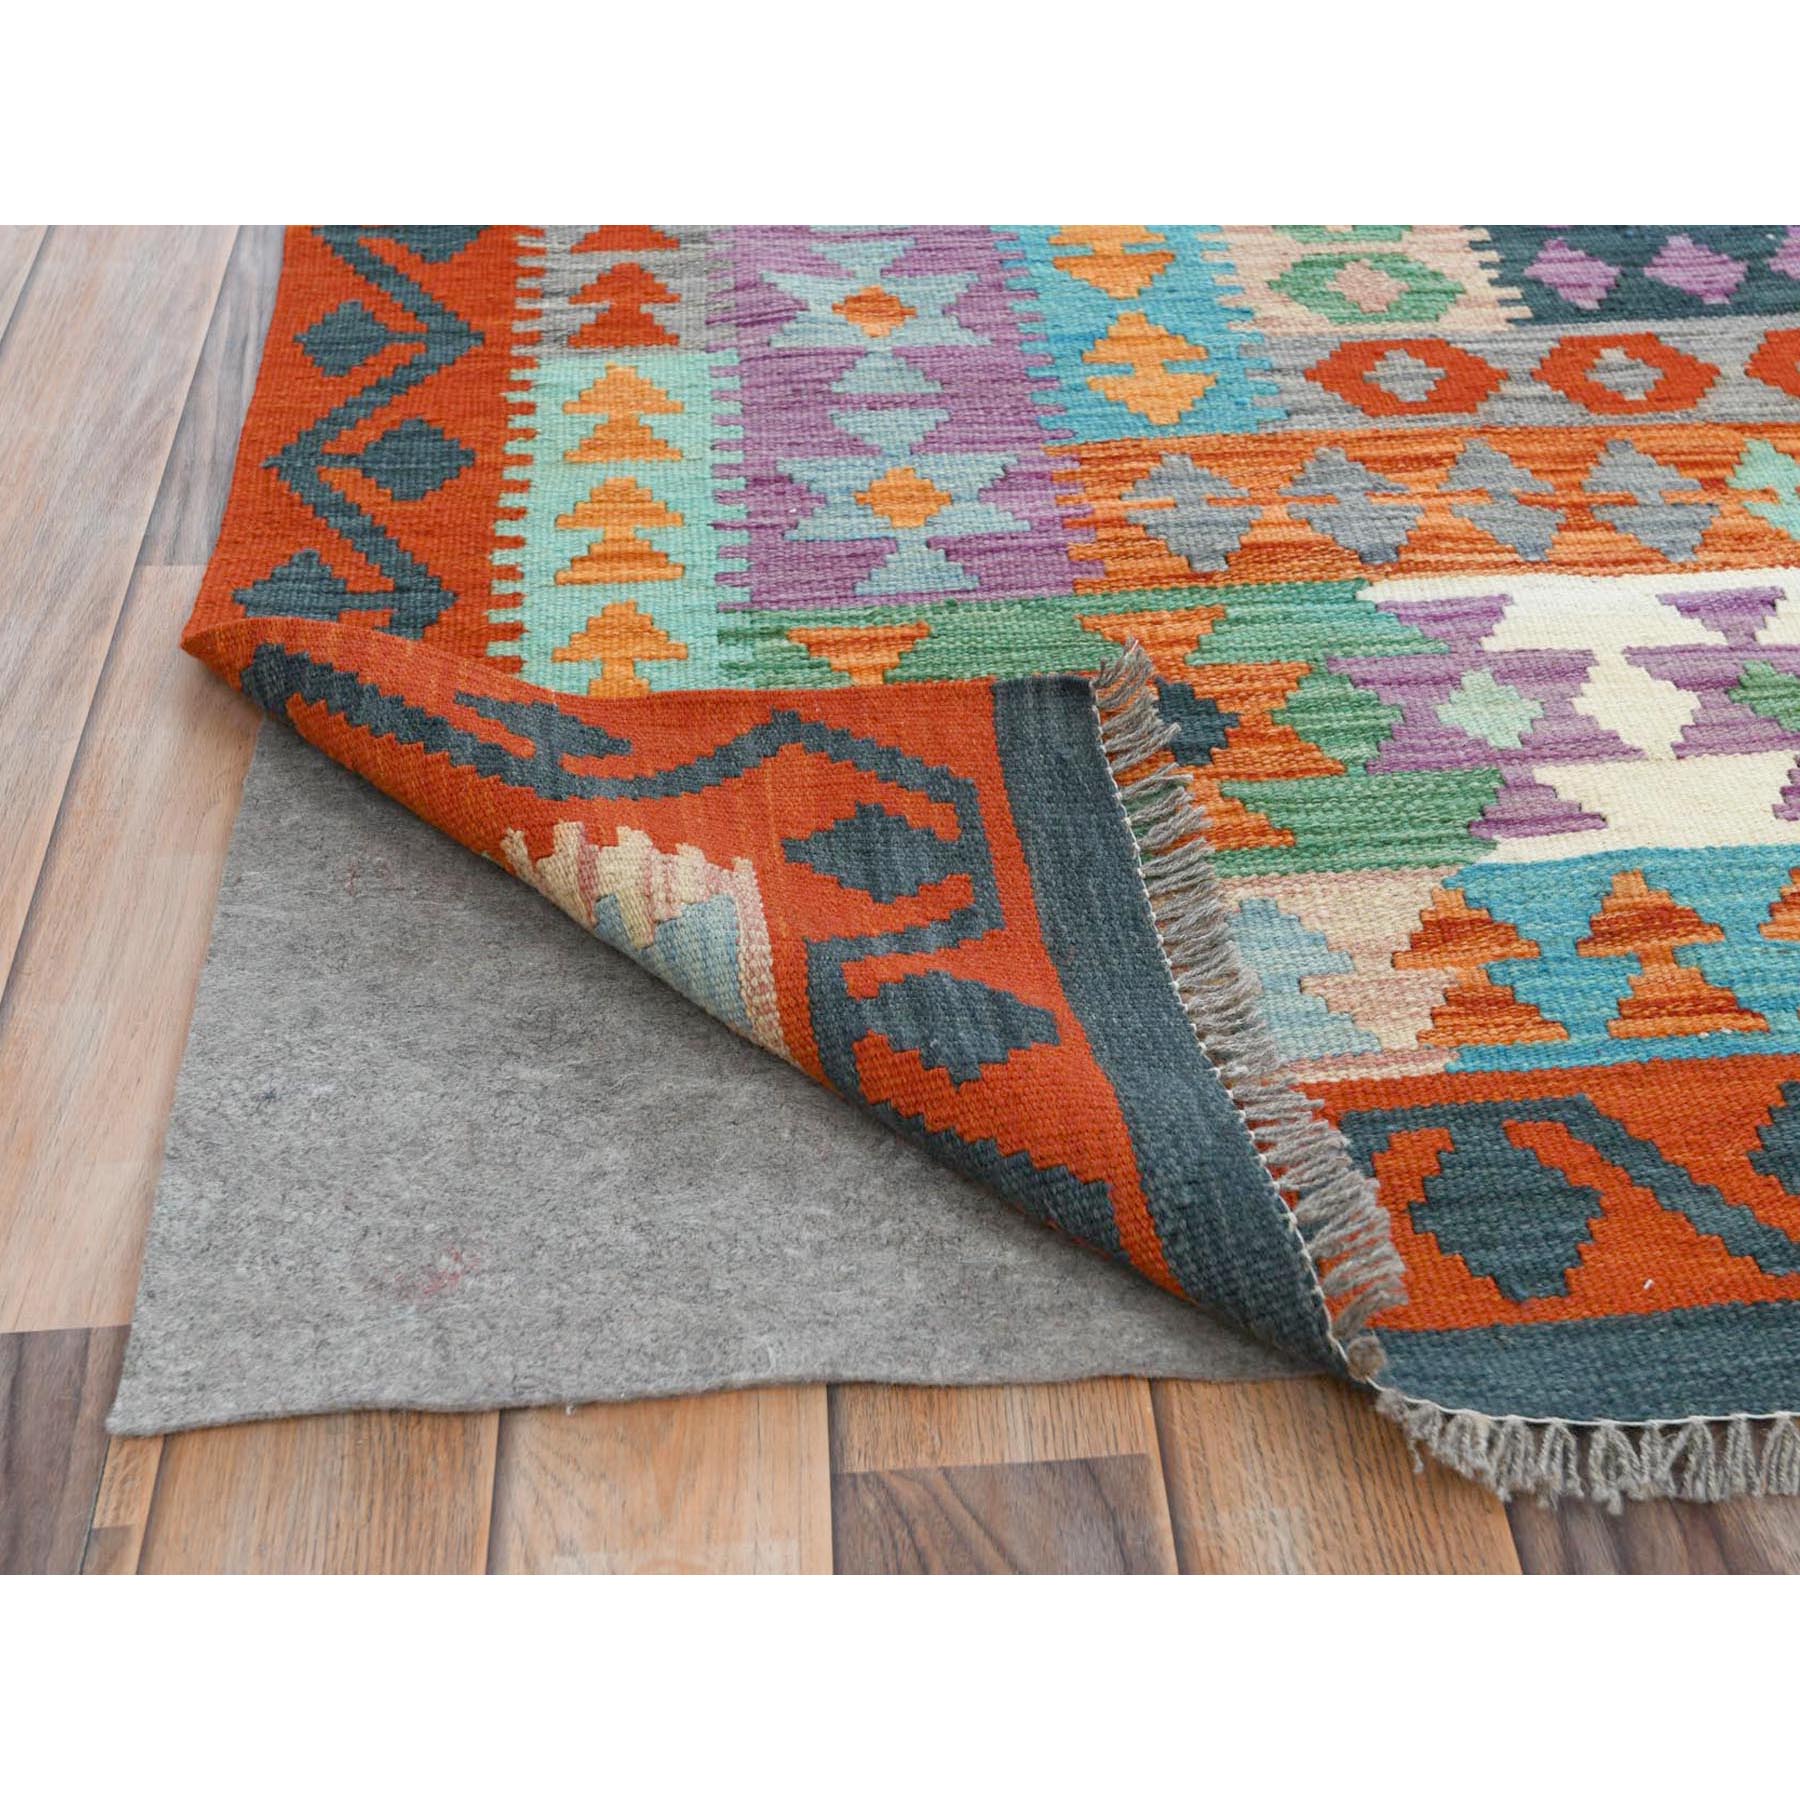 9'10"x13'2" Colorful, Afghan Kilim with Geometric Design Flat Weave, Veggie Dyes Pure Wool Hand Woven, Reversible Oriental Rug 